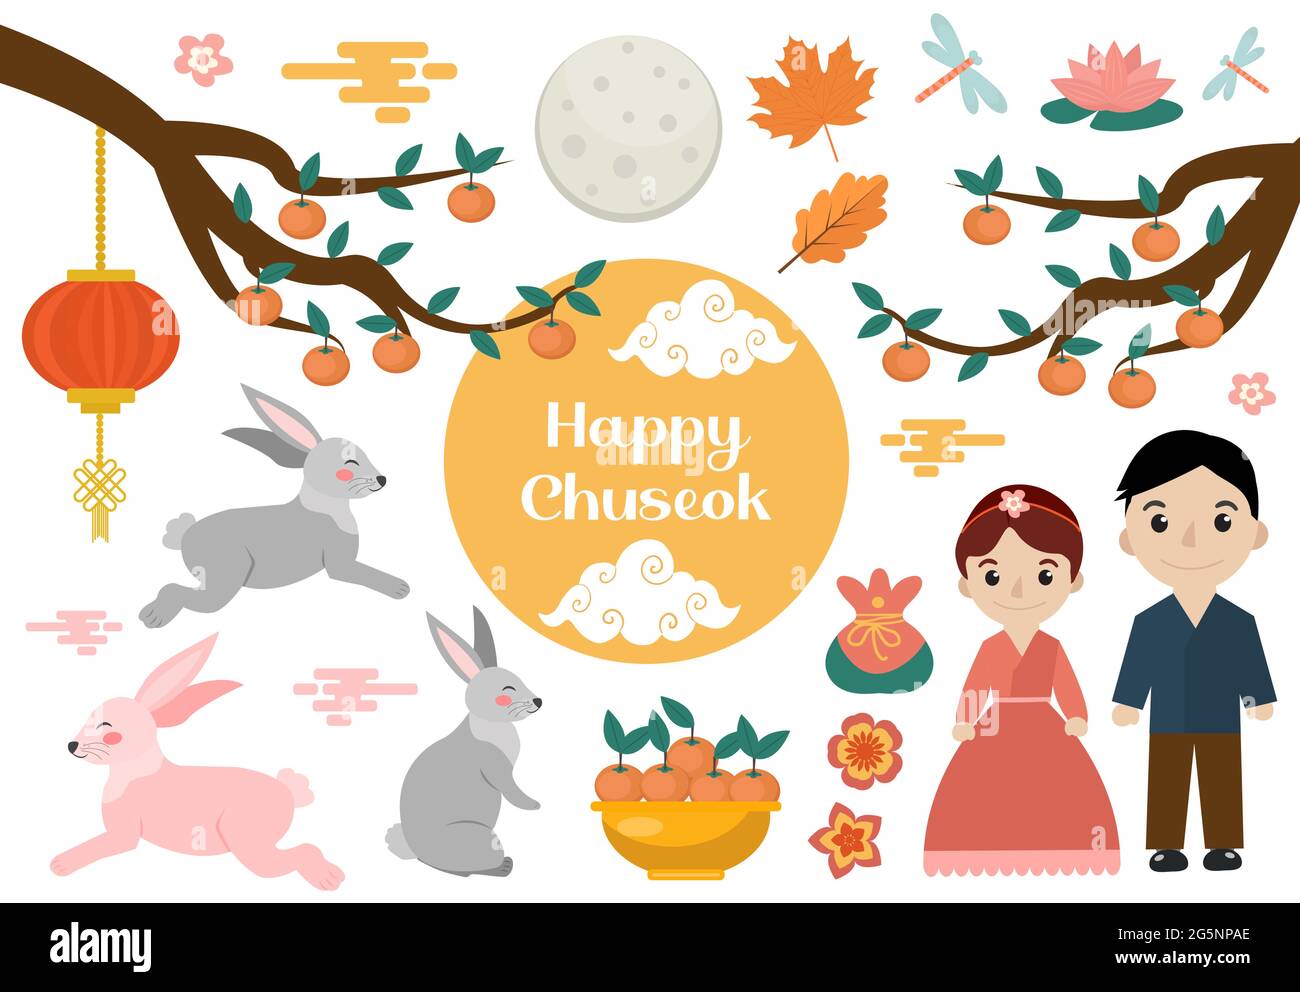 Happy Chuseok set of objects. Mid autumn festival collection of design elements with persimmon, rabbits, moon. Korean Thanksgiving and Harvest Stock Vector